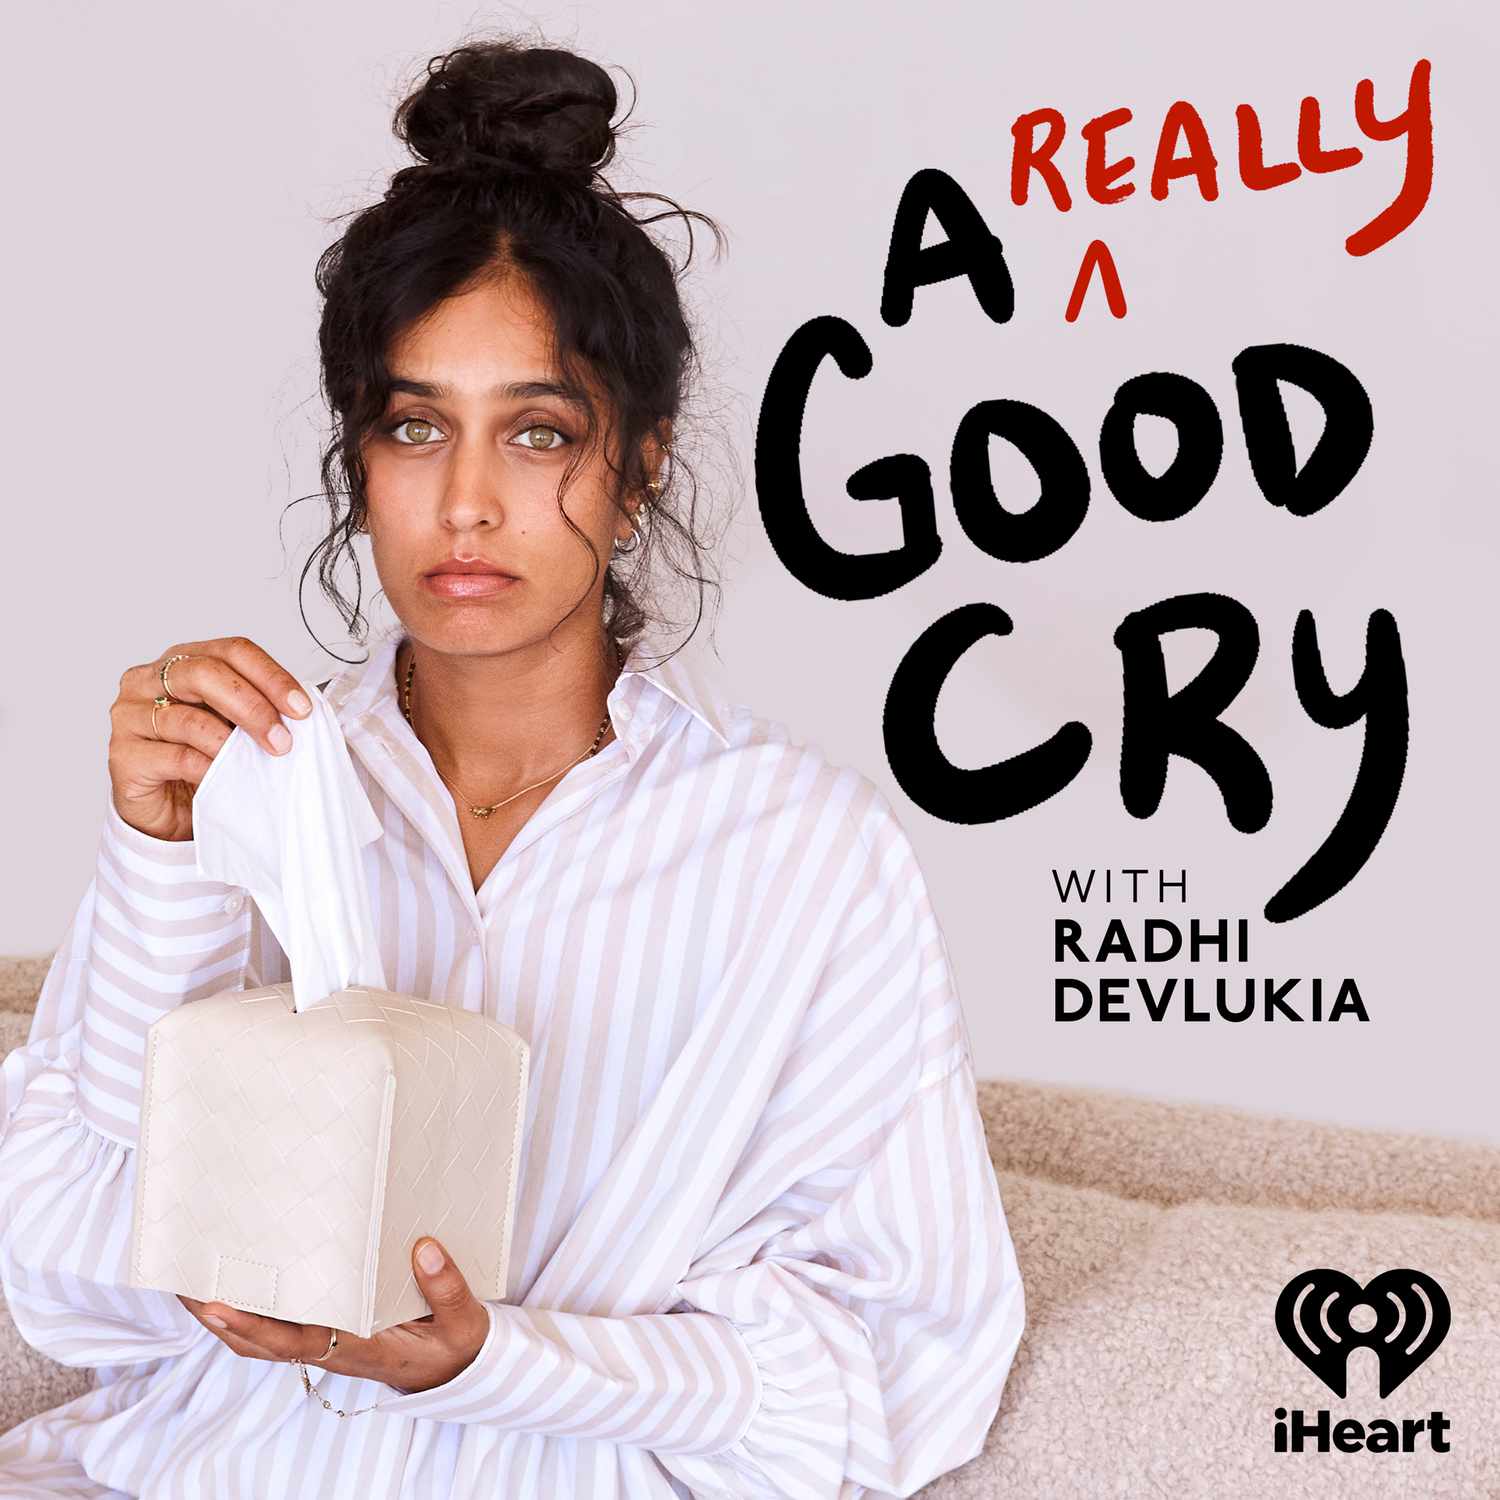 A Really Good Cry with Radhi Devlukia